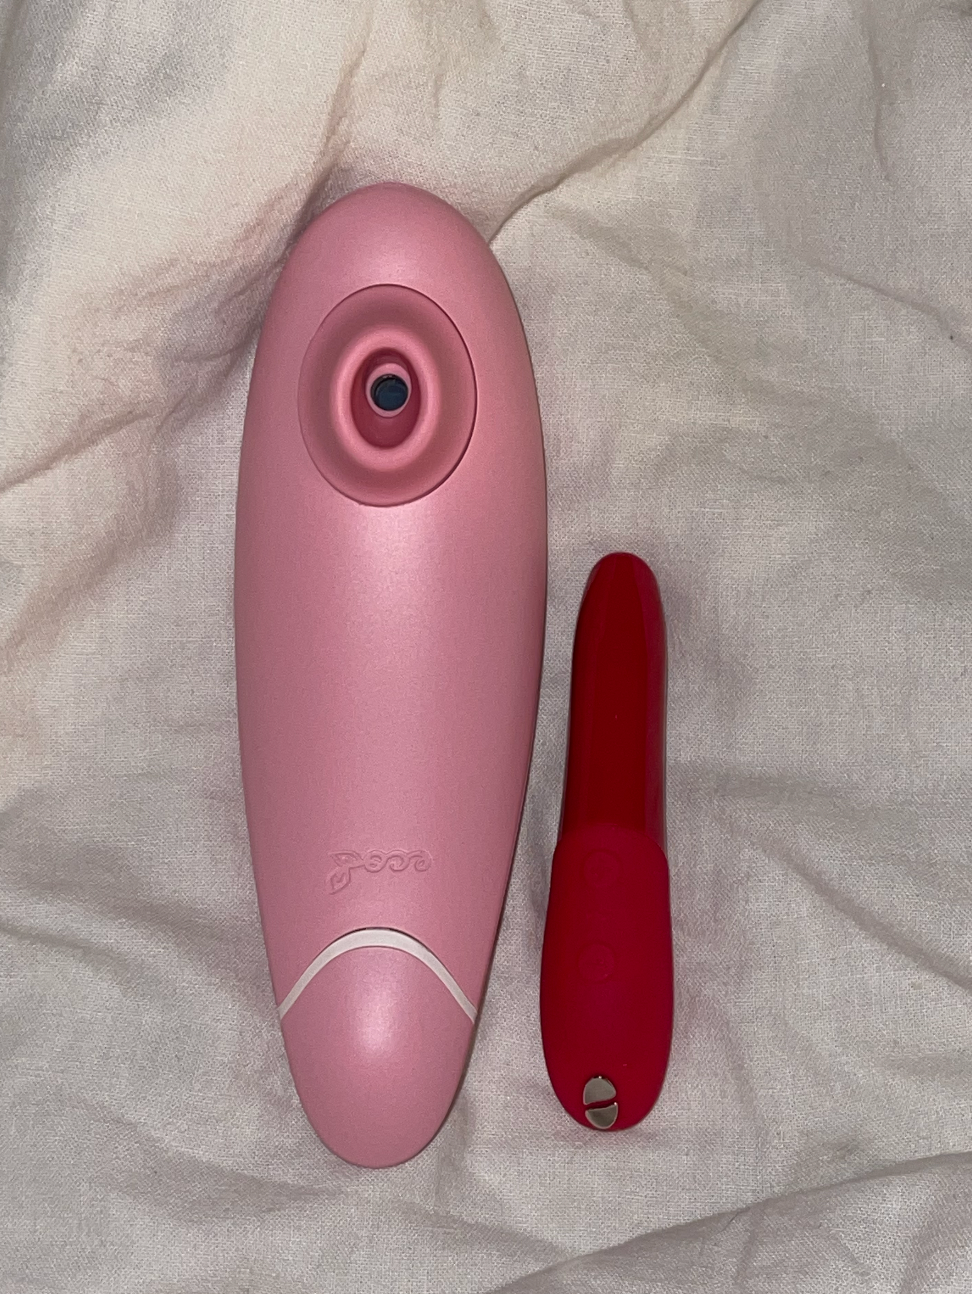 Best vibrator for living at home in your 20s by Sophie Kapner Medium photo photo